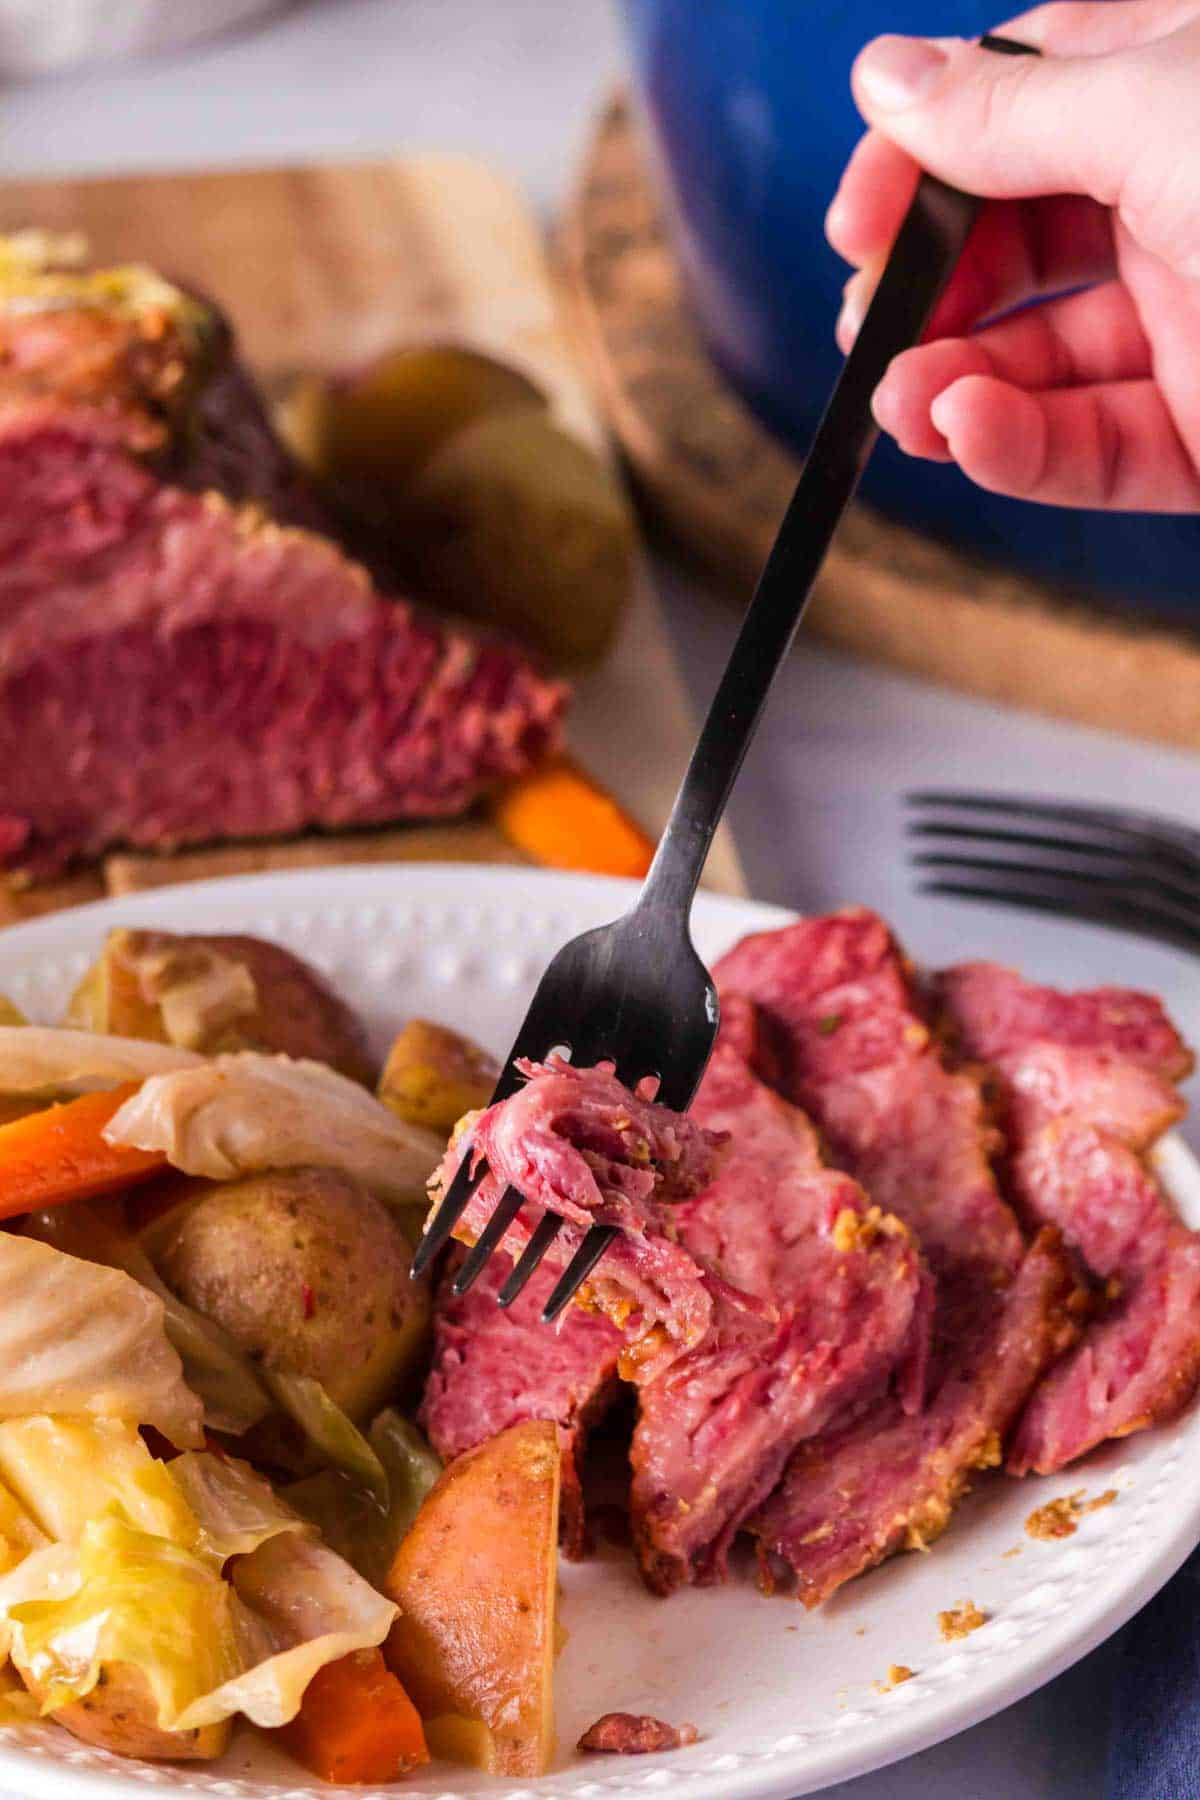 A hand holding a fork digs into a plate of corned beef with cabbage and potatoes.